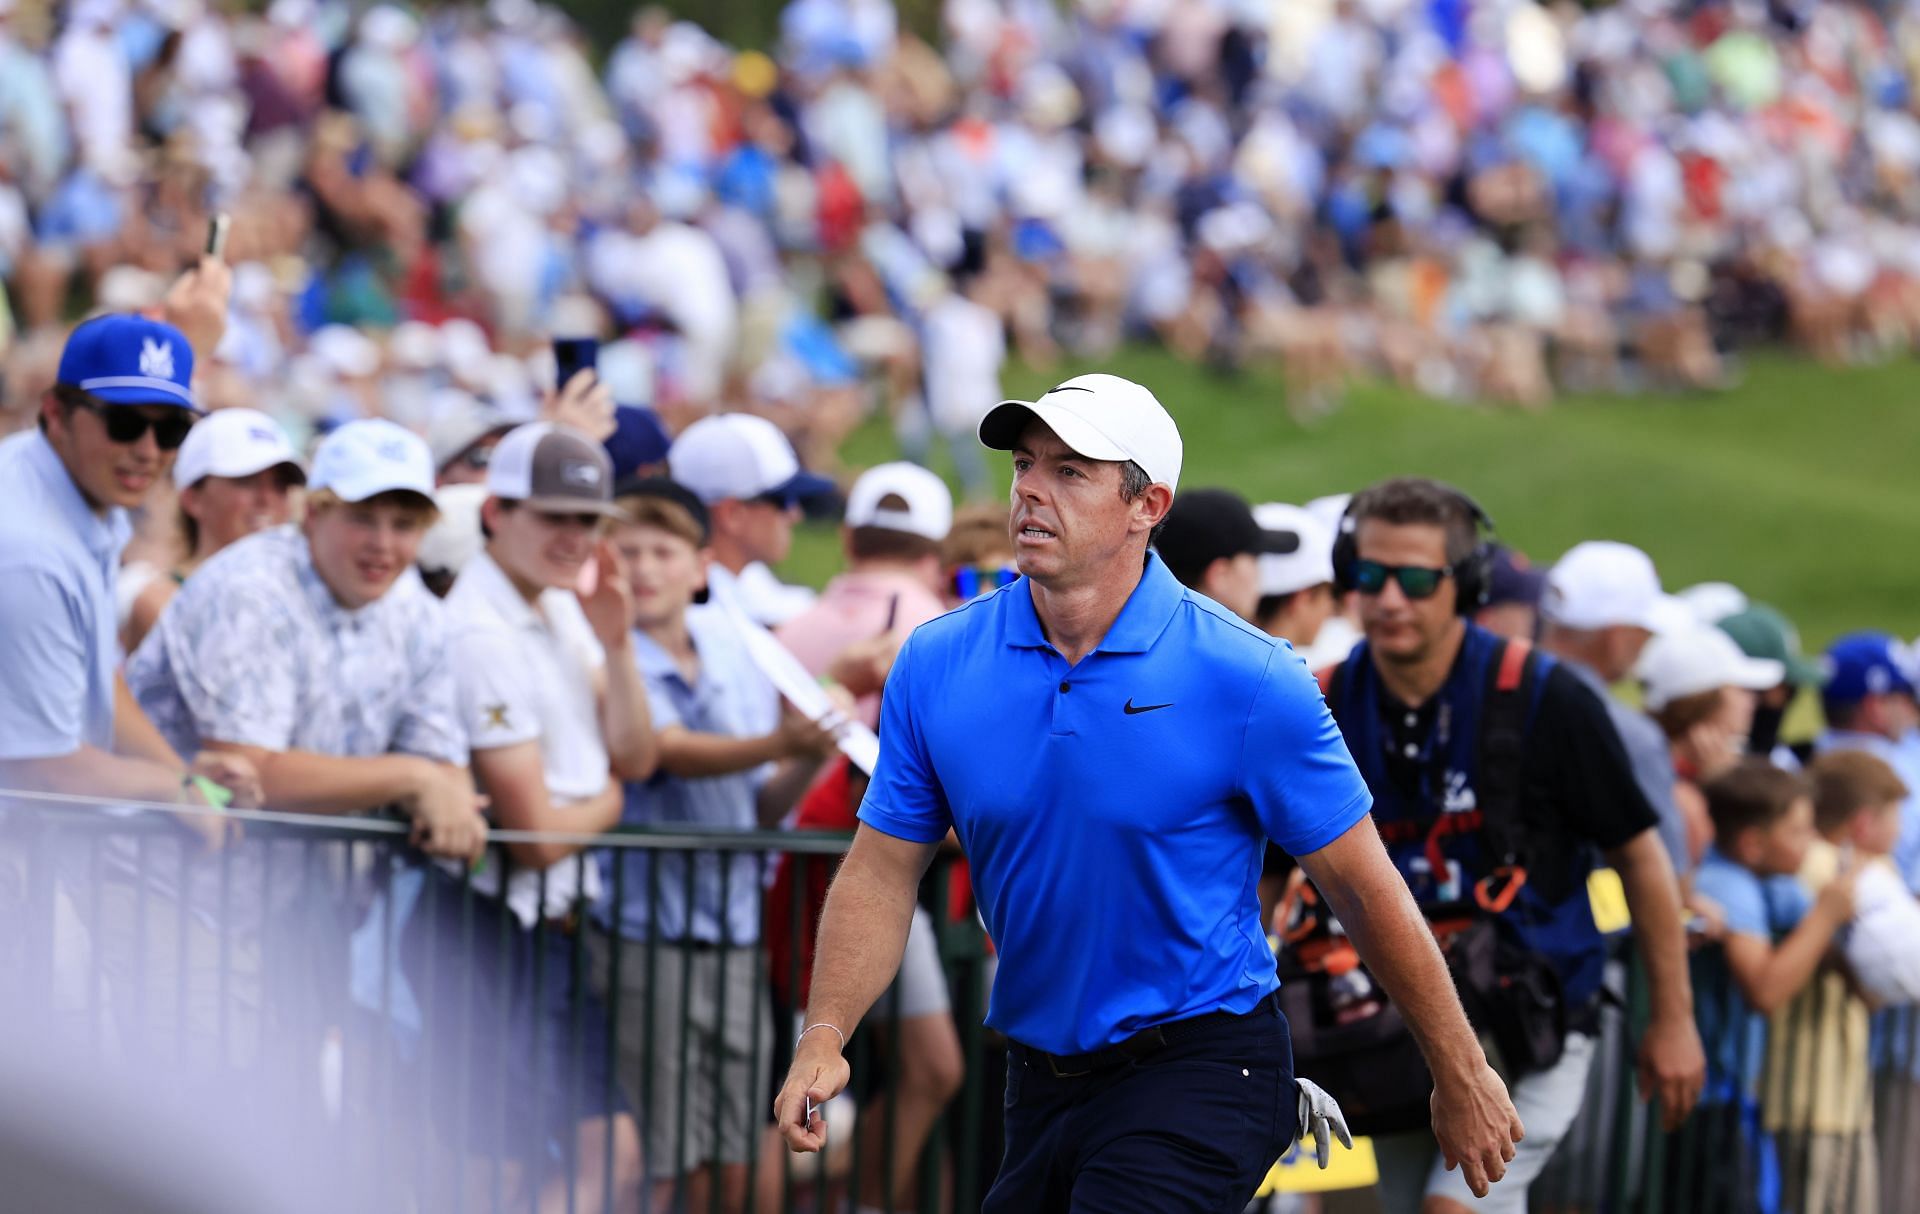 Rory McIlroy just wants to win despite pending divorce